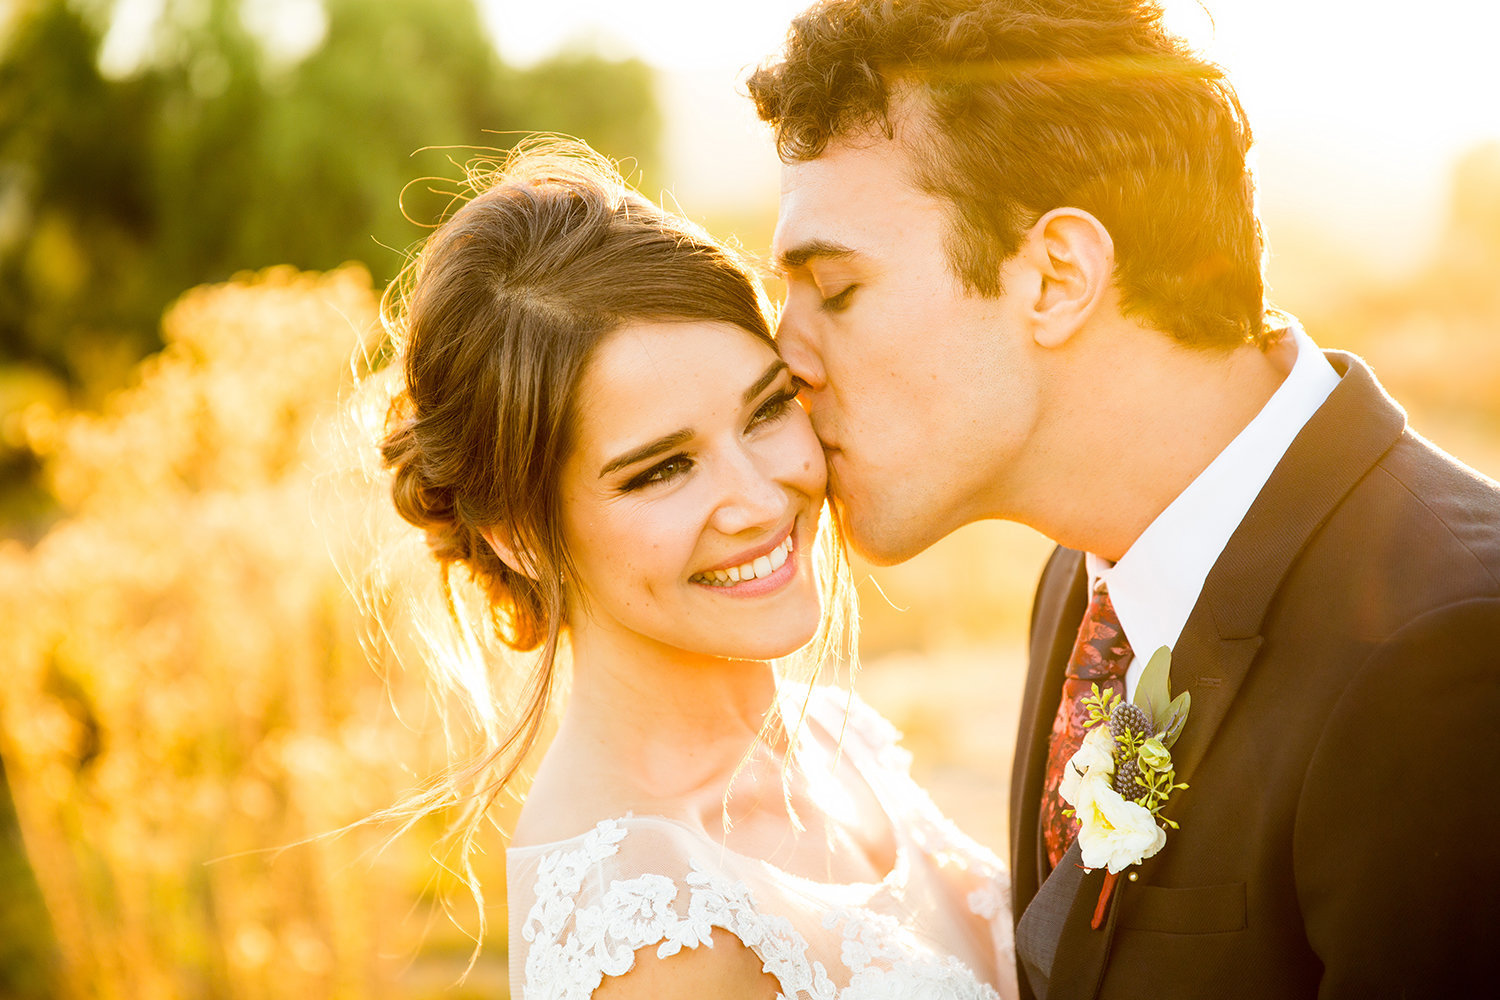 Groom Kissing Bride on the Cheek at Sunset